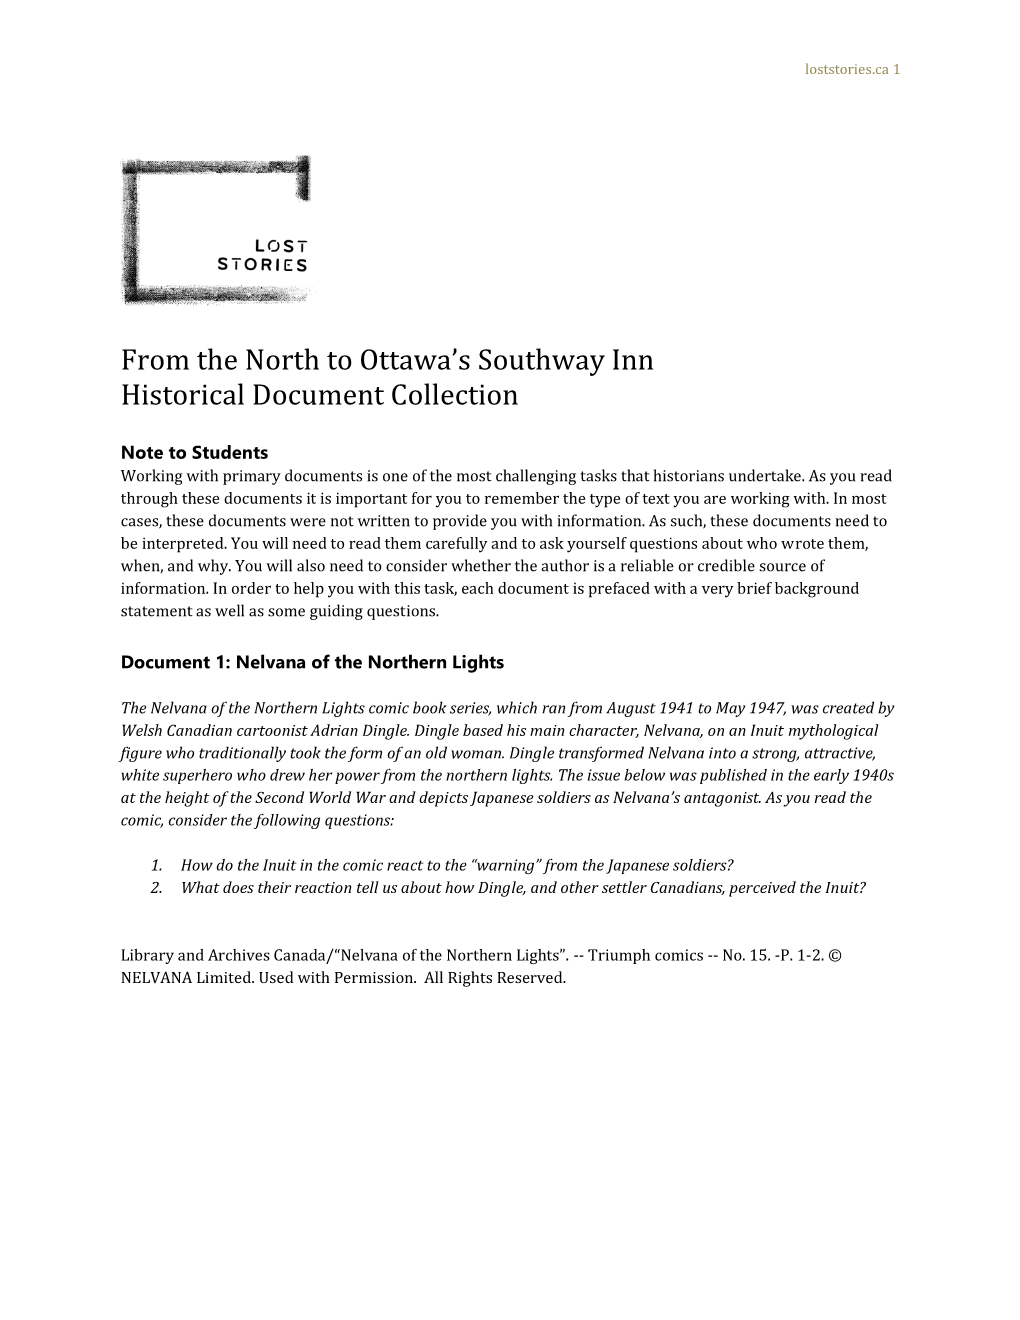 From the North to Ottawa's Southway Inn Historical Document Collection